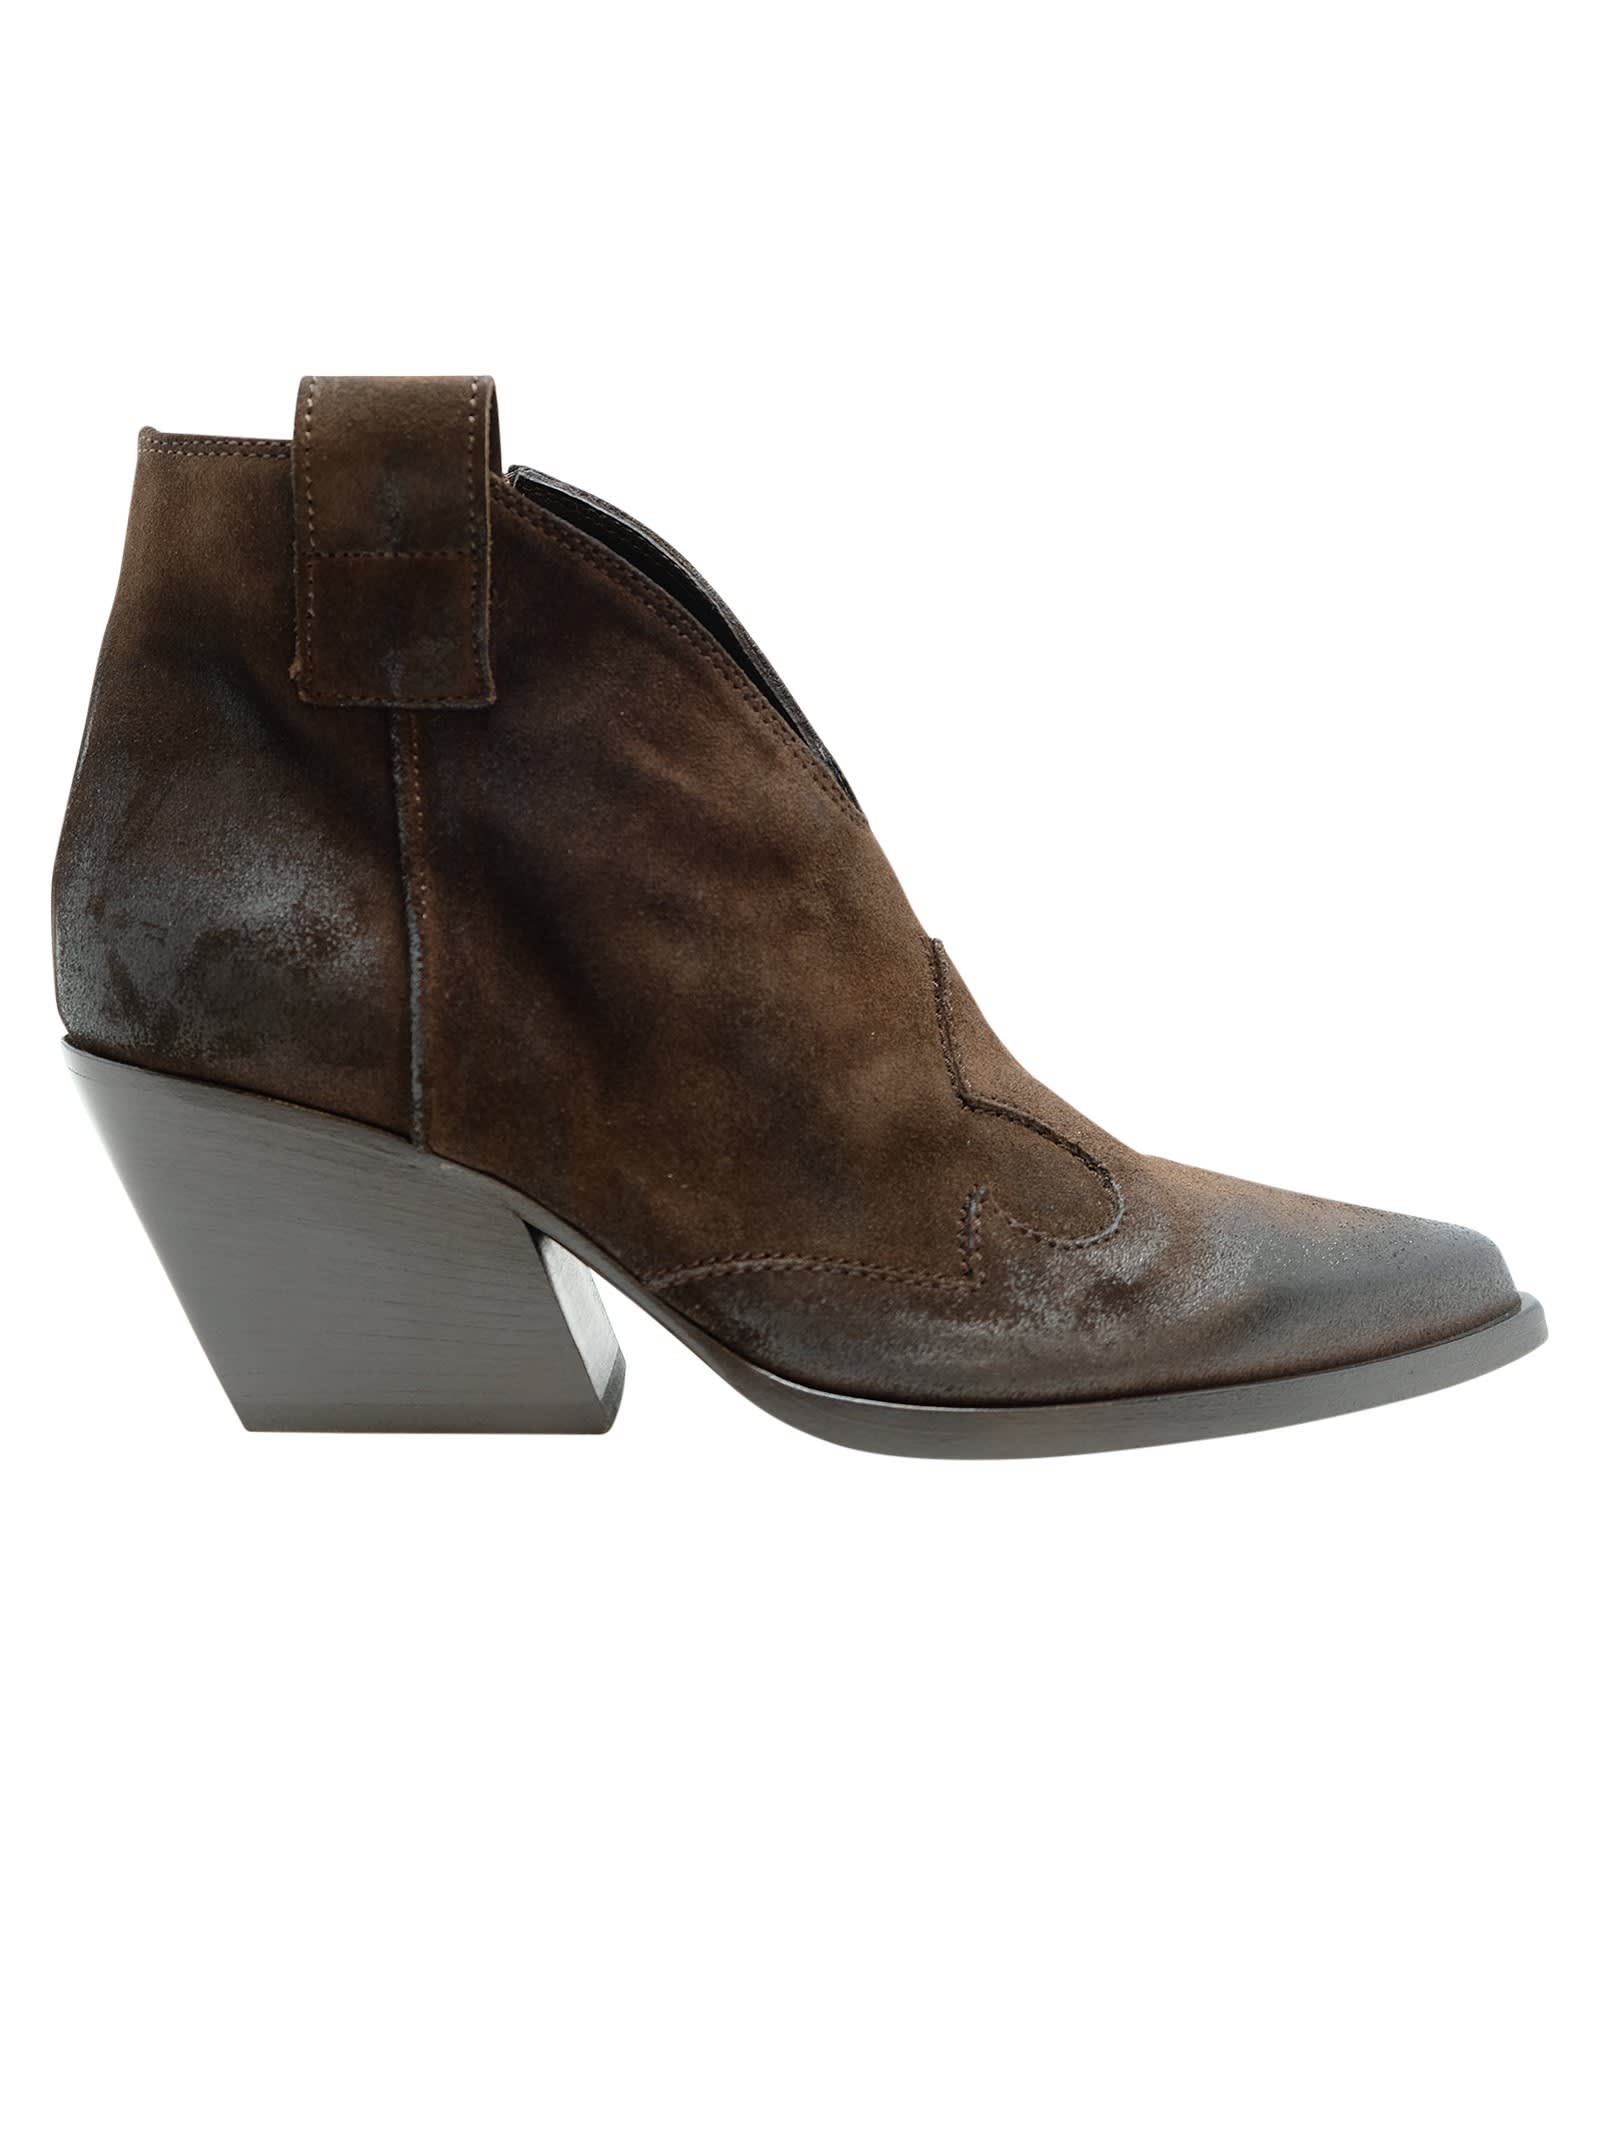 Elena Iachi Suede Ankle Boots